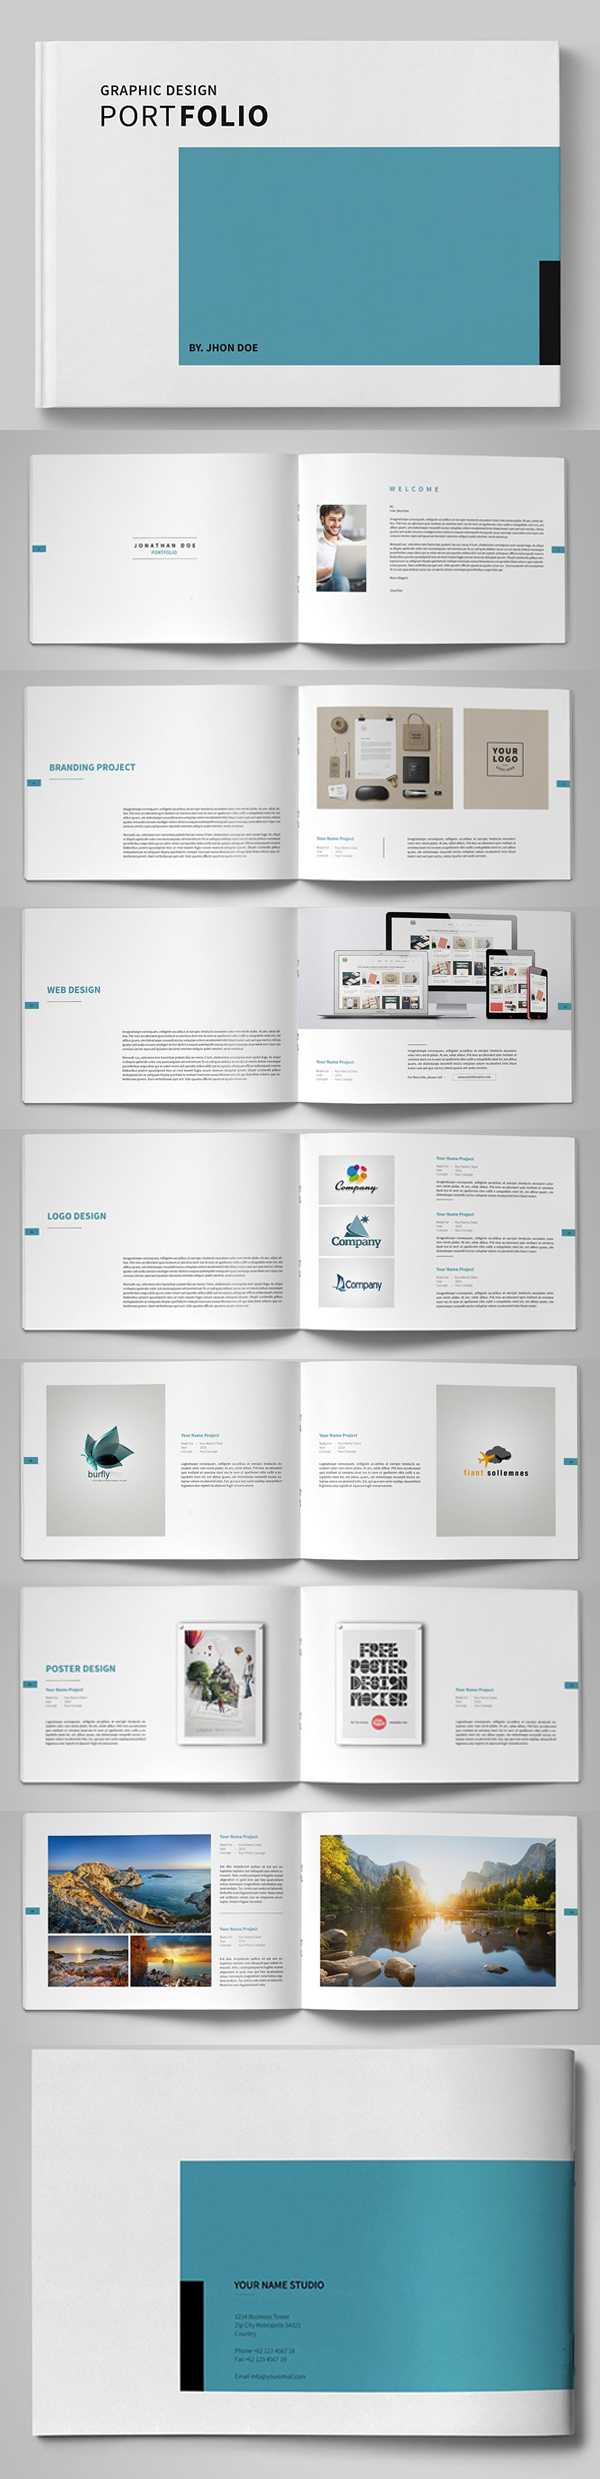 20 New Professional Catalog Brochure Templates | Design In Brochure Templates Free Download Indesign